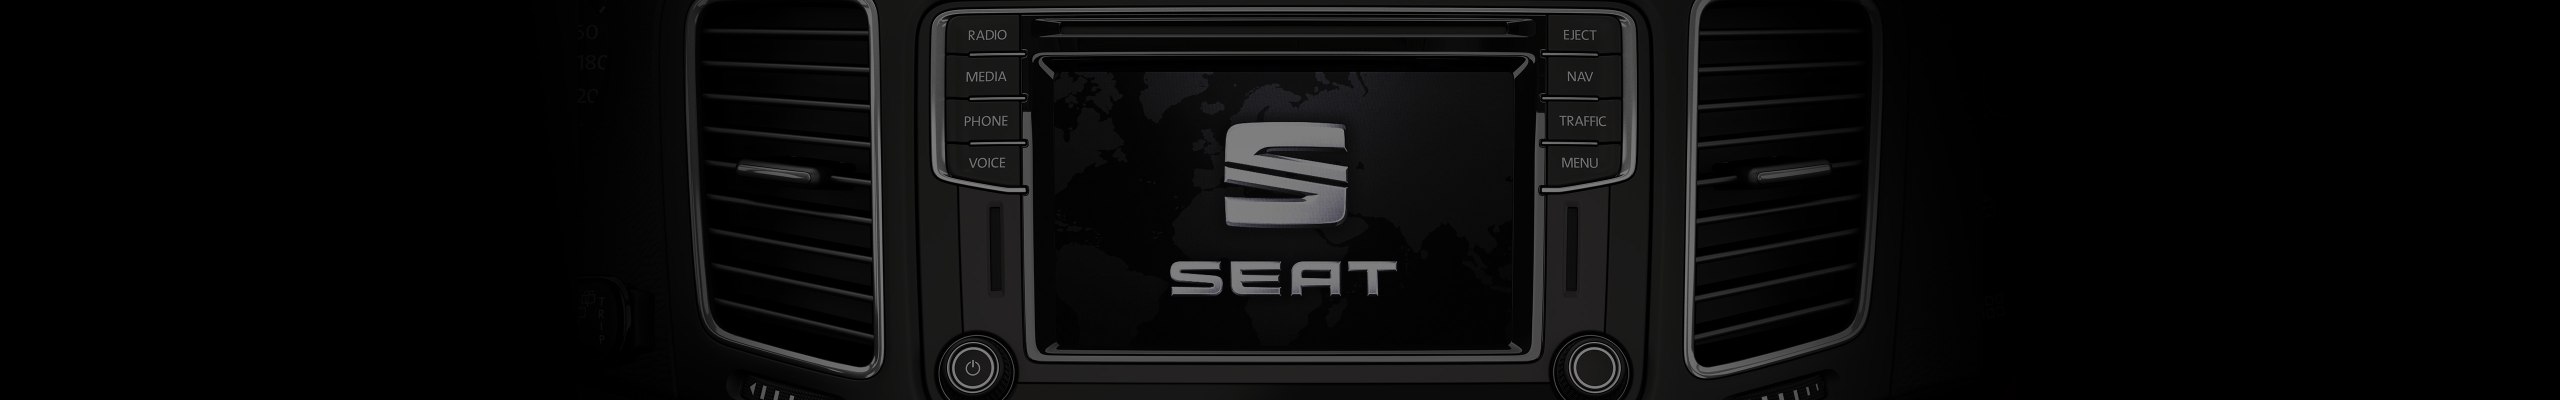 Up-to-date navigation maps for your SEAT Navi System